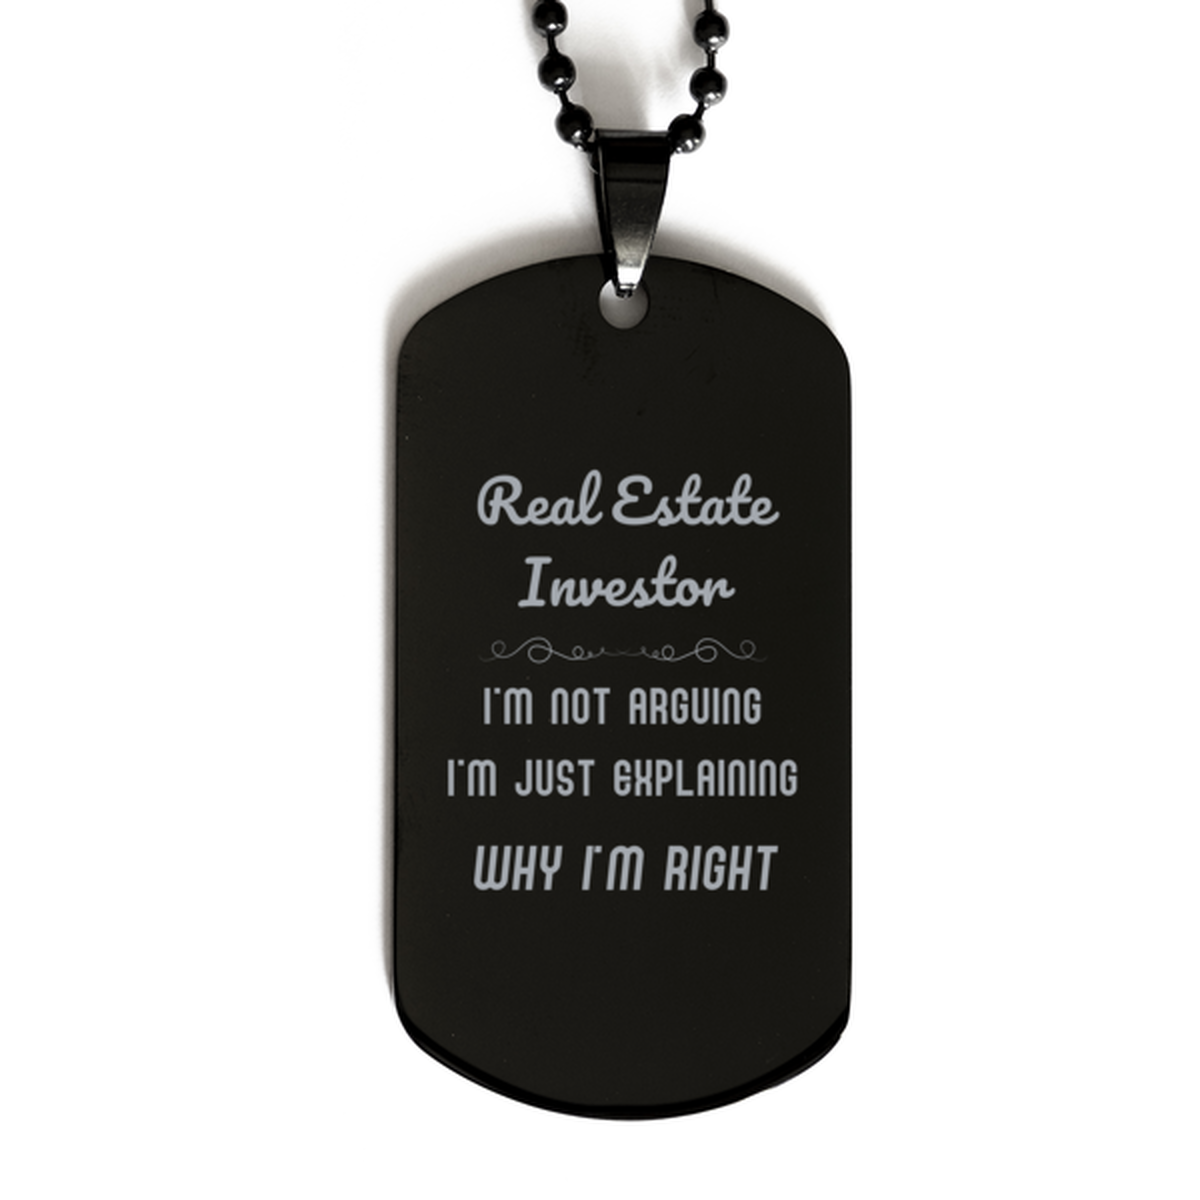 Real Estate Investor I'm not Arguing. I'm Just Explaining Why I'm RIGHT Black Dog Tag, Funny Saying Quote Real Estate Investor Gifts For Real Estate Investor Graduation Birthday Christmas Gifts for Men Women Coworker